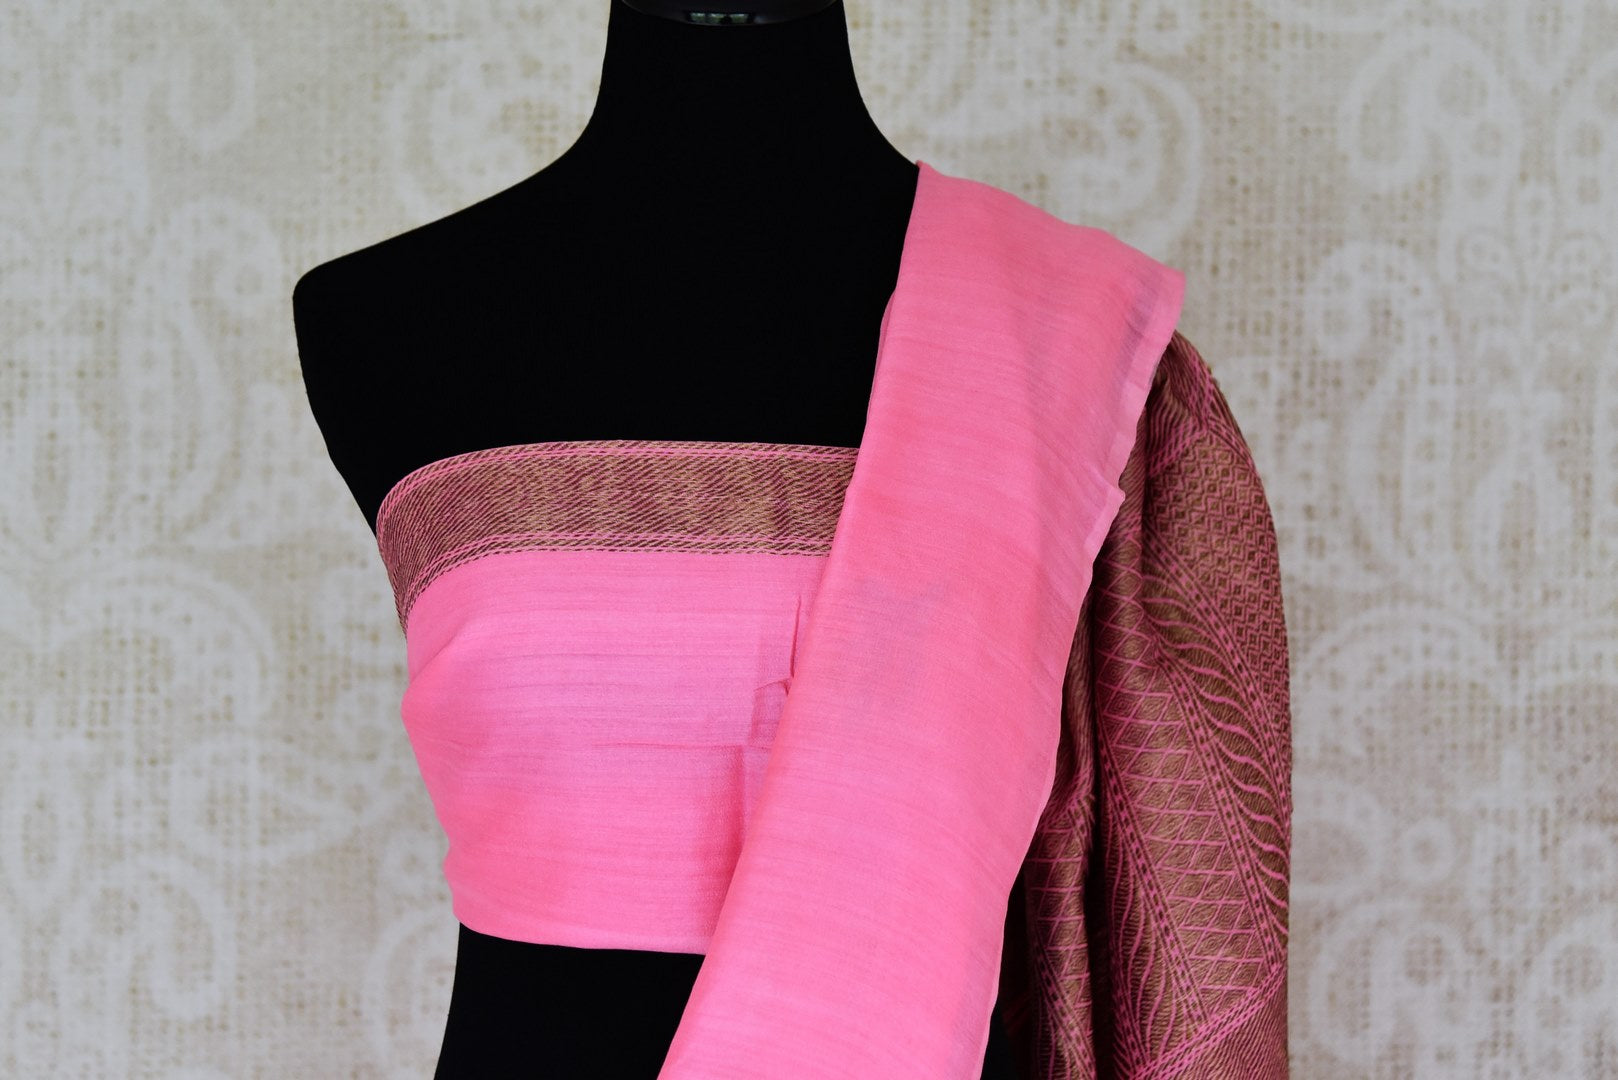 Shop woven pink color muga Banarasi saree online in USA with floral buta from Pure Elegance online store. Visit our exclusive Indian clothing store in USA and get floored by a range of exquisite Indian Kanjivaram saris, Banarasi sarees, silk sarees, Indian jewelry and much more to complete your ethnic look.-blouse pallu